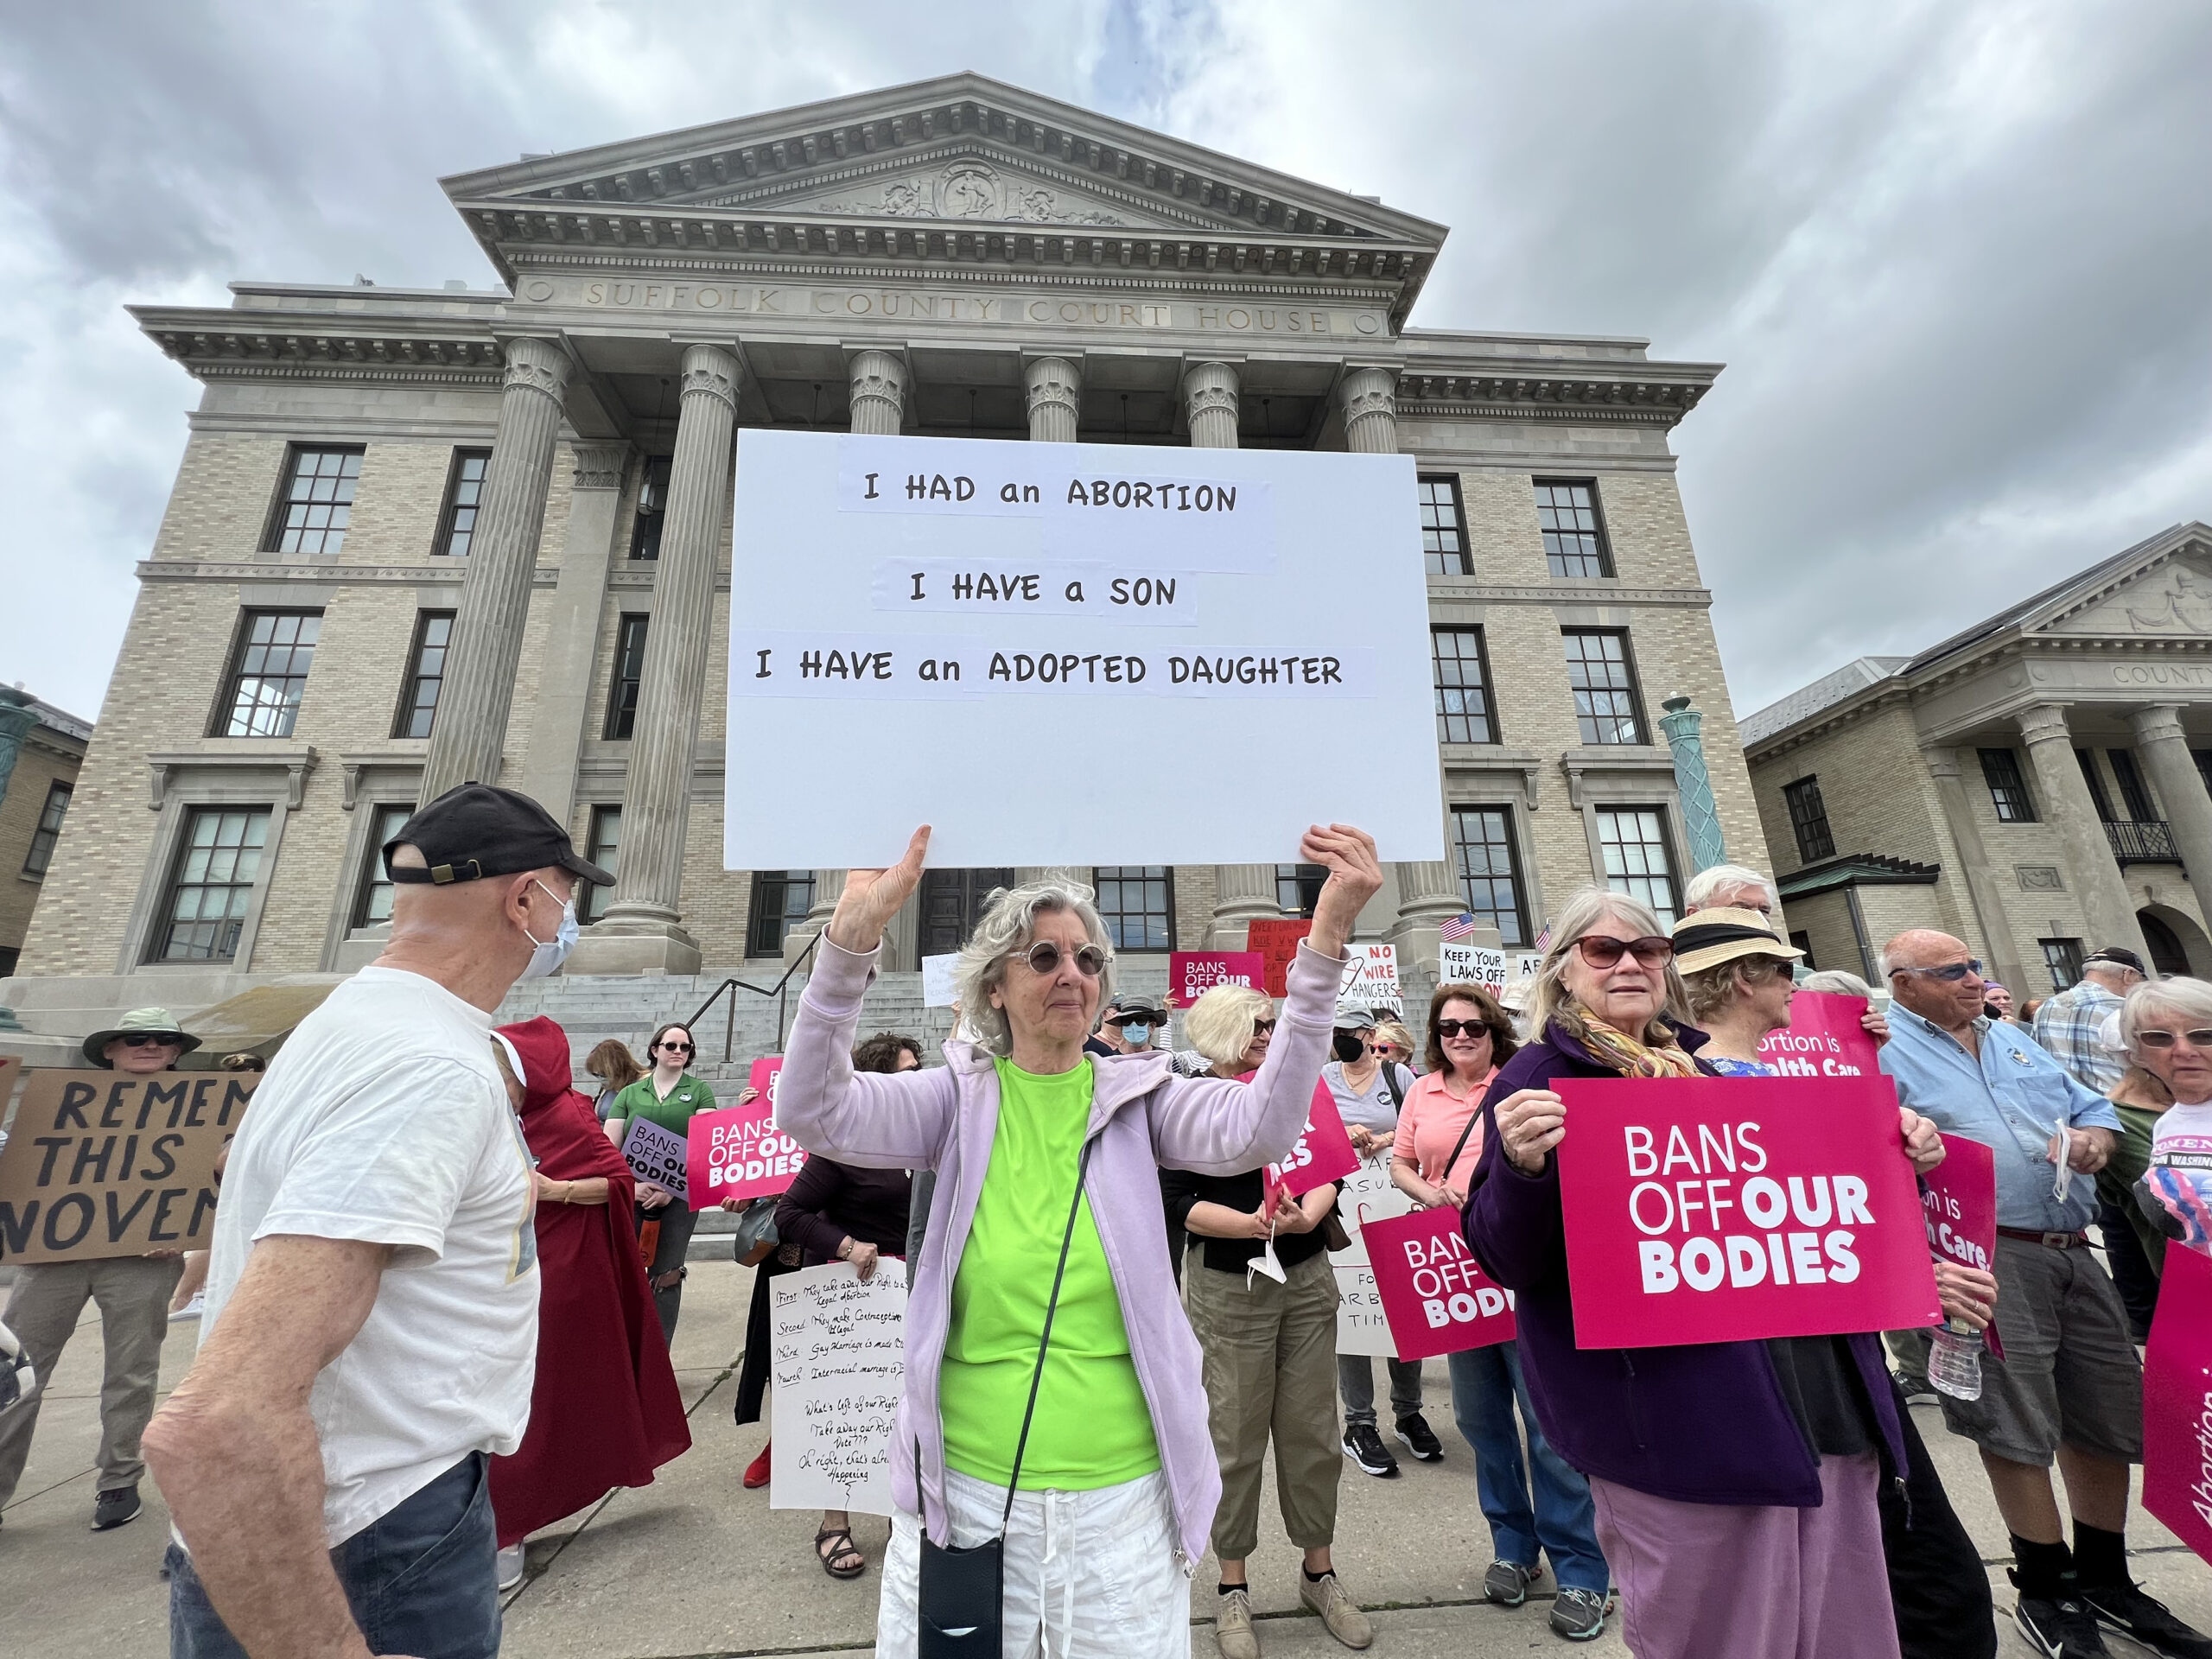 Hundreds of people gathered at the Riverhead Supreme Court building on Saturday to rally for reproductive rights.   DANA SHAW